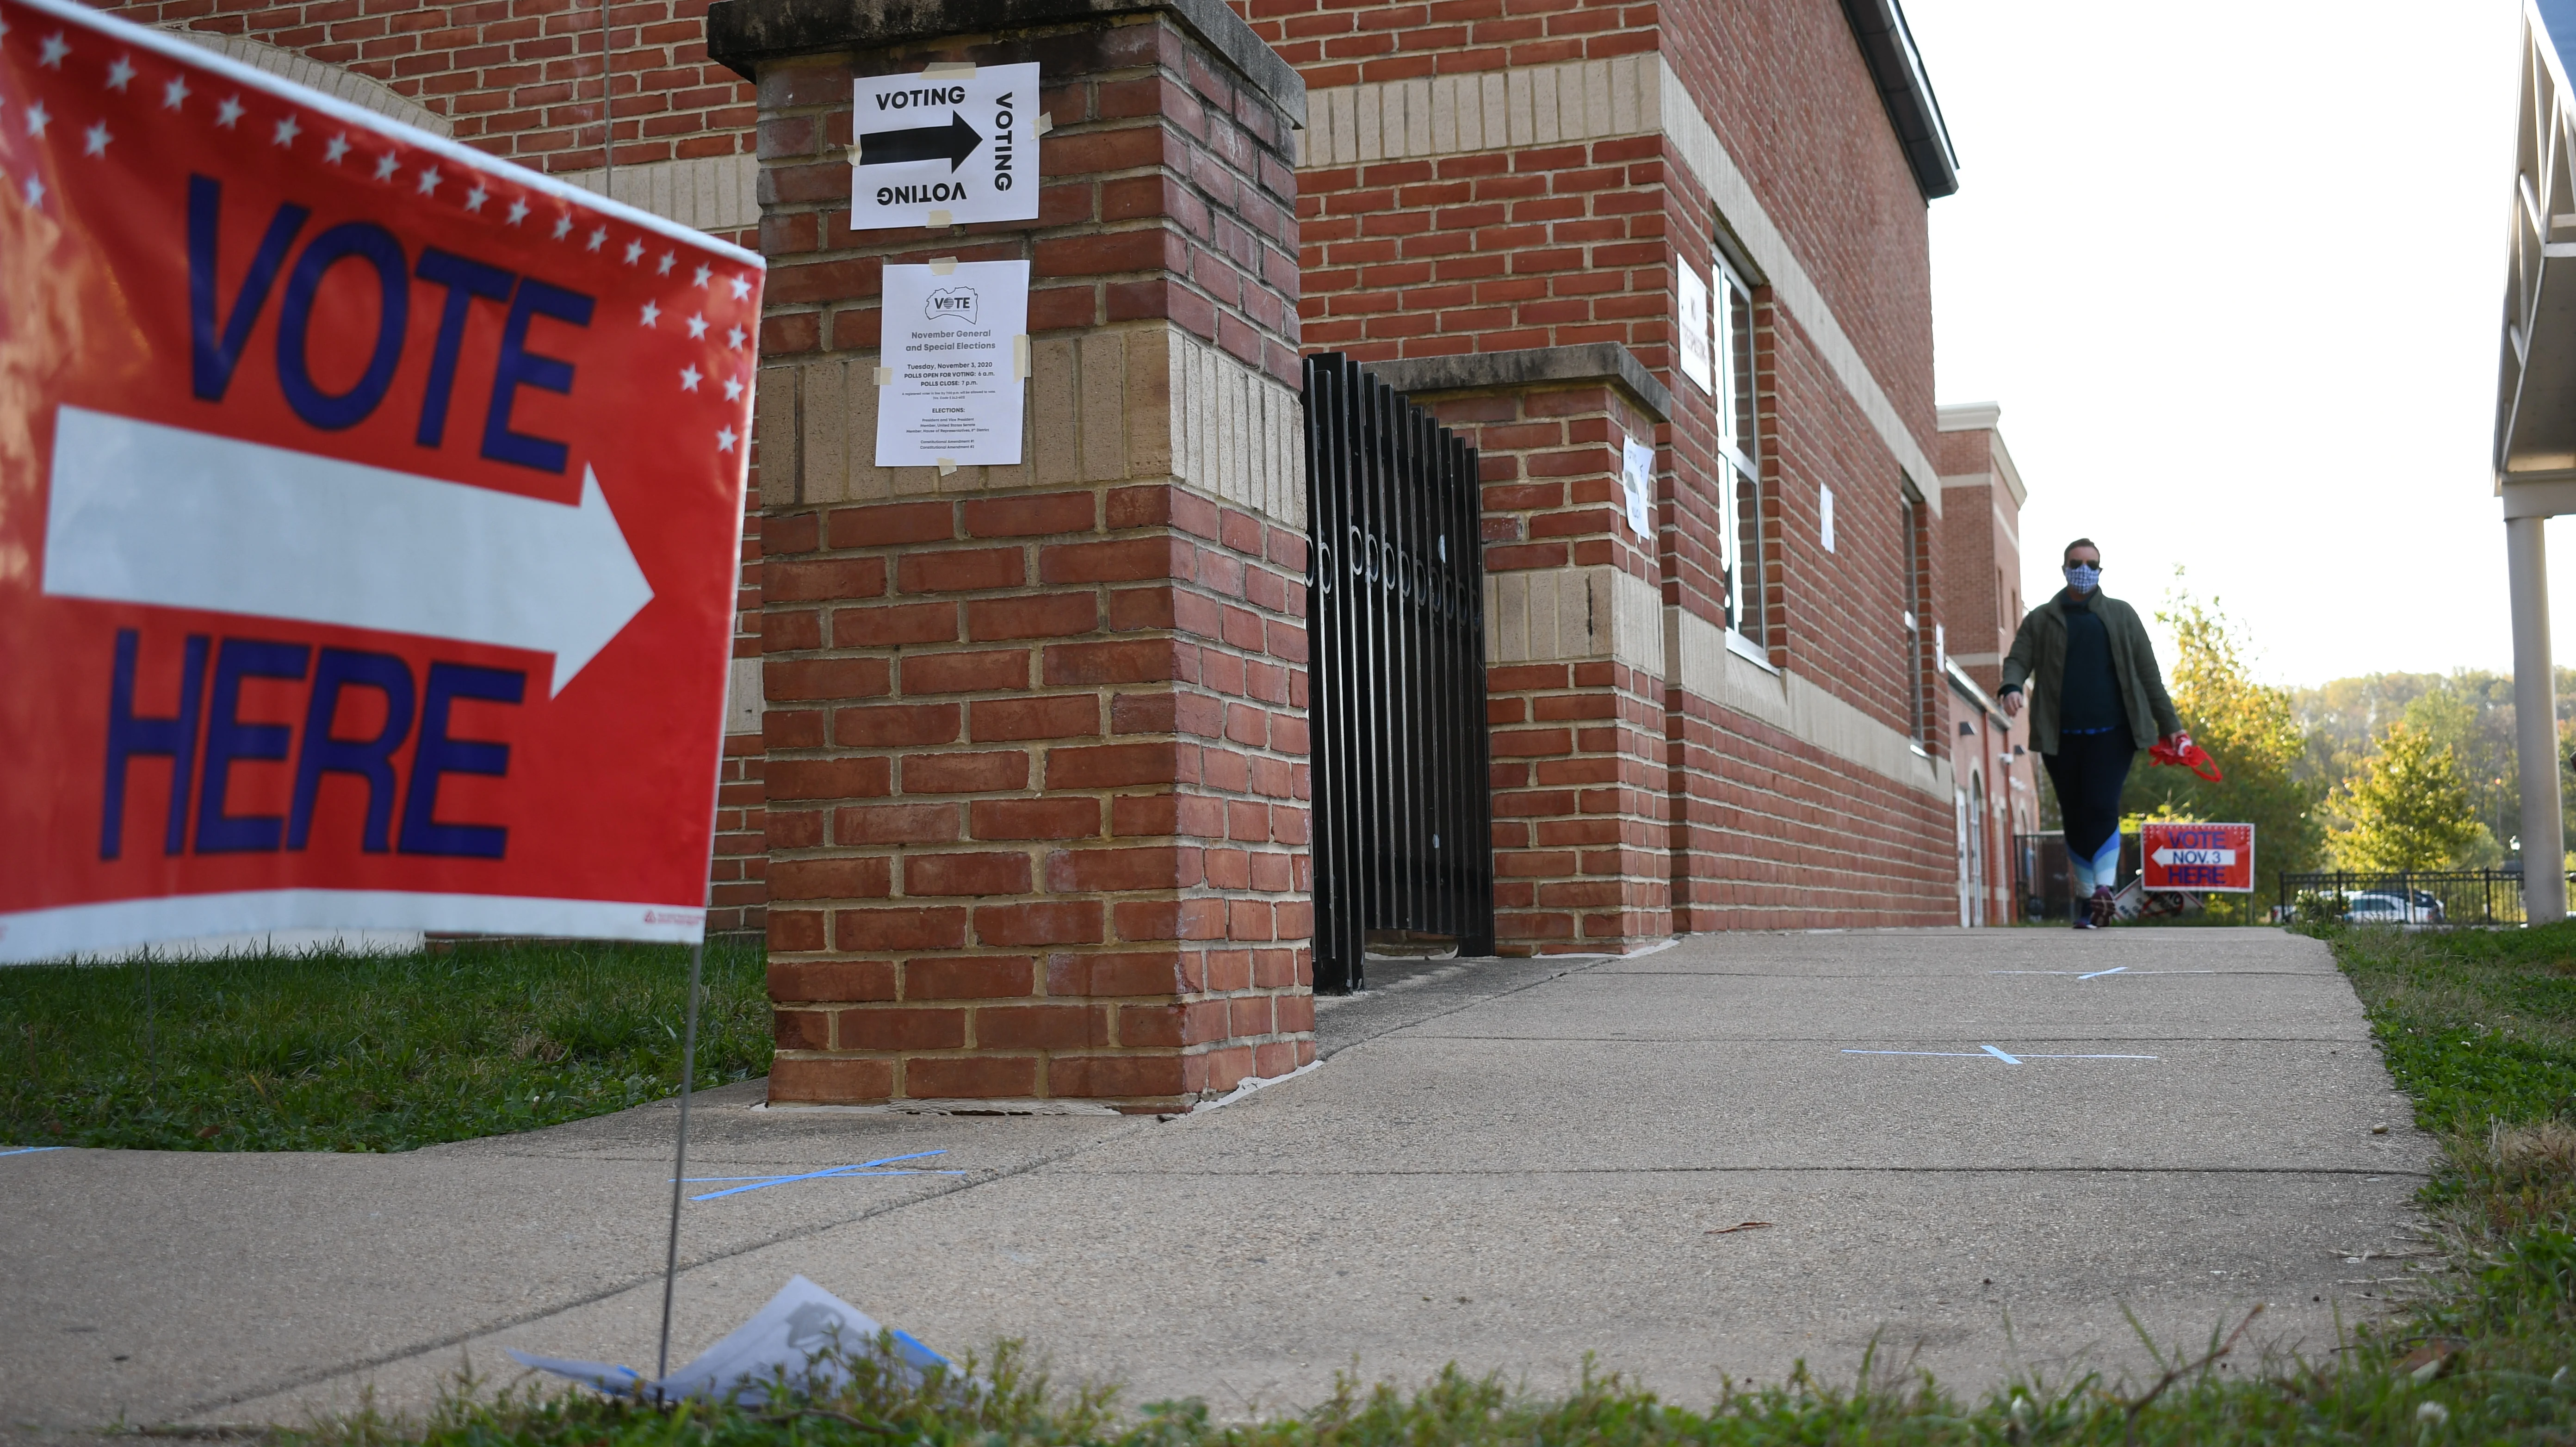 A woman exits a voting center. Photo provided by Creative Commons.